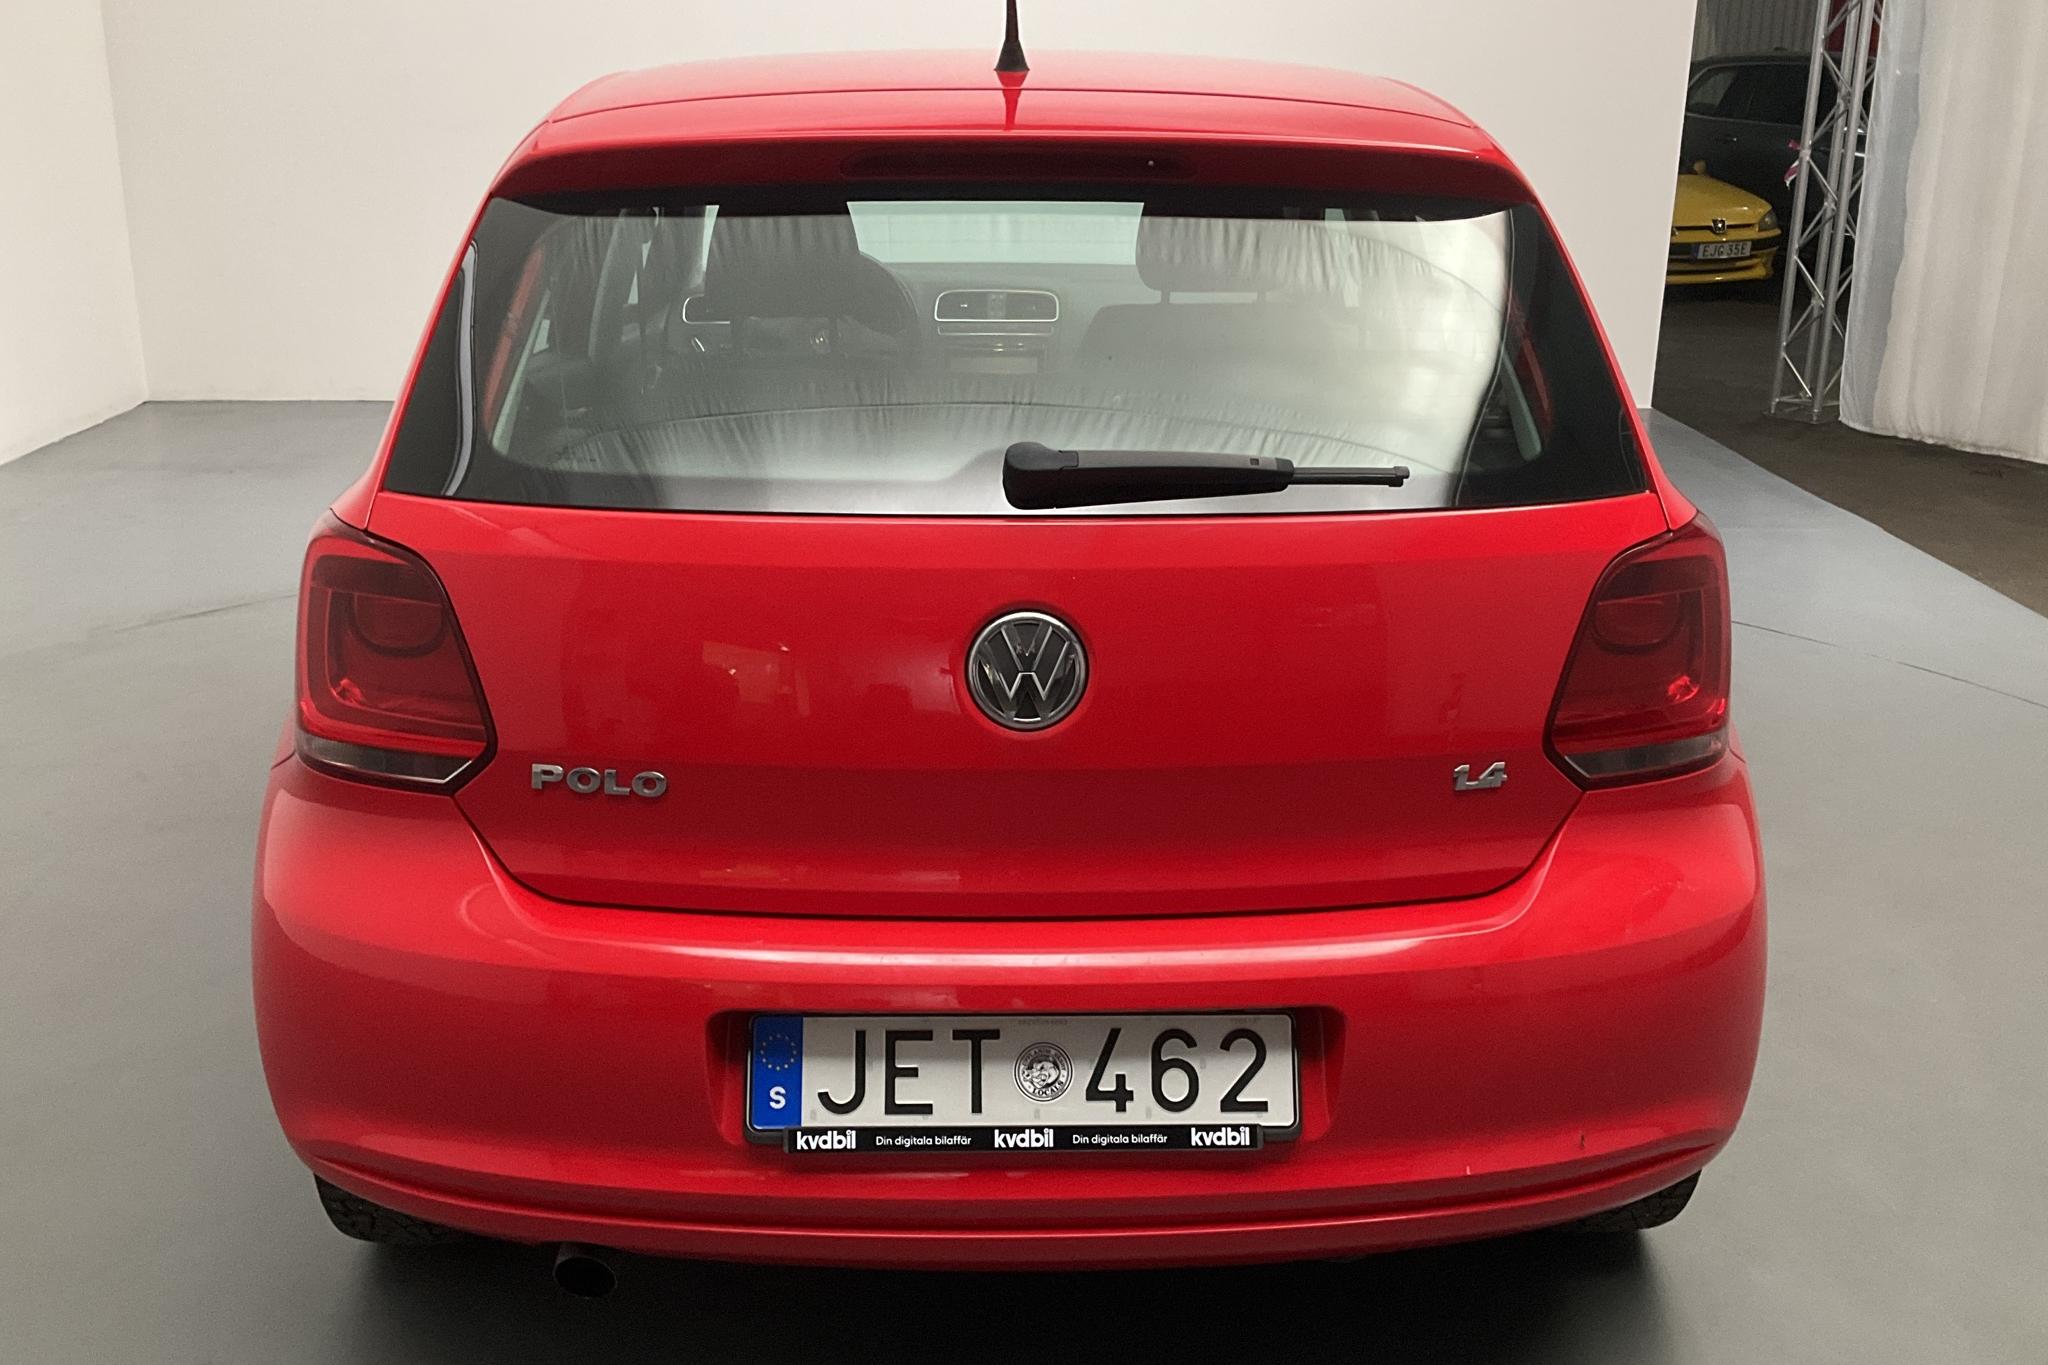 VW Polo 1.4 5dr (85hk) - 82 190 km - Automatic - red - 2010